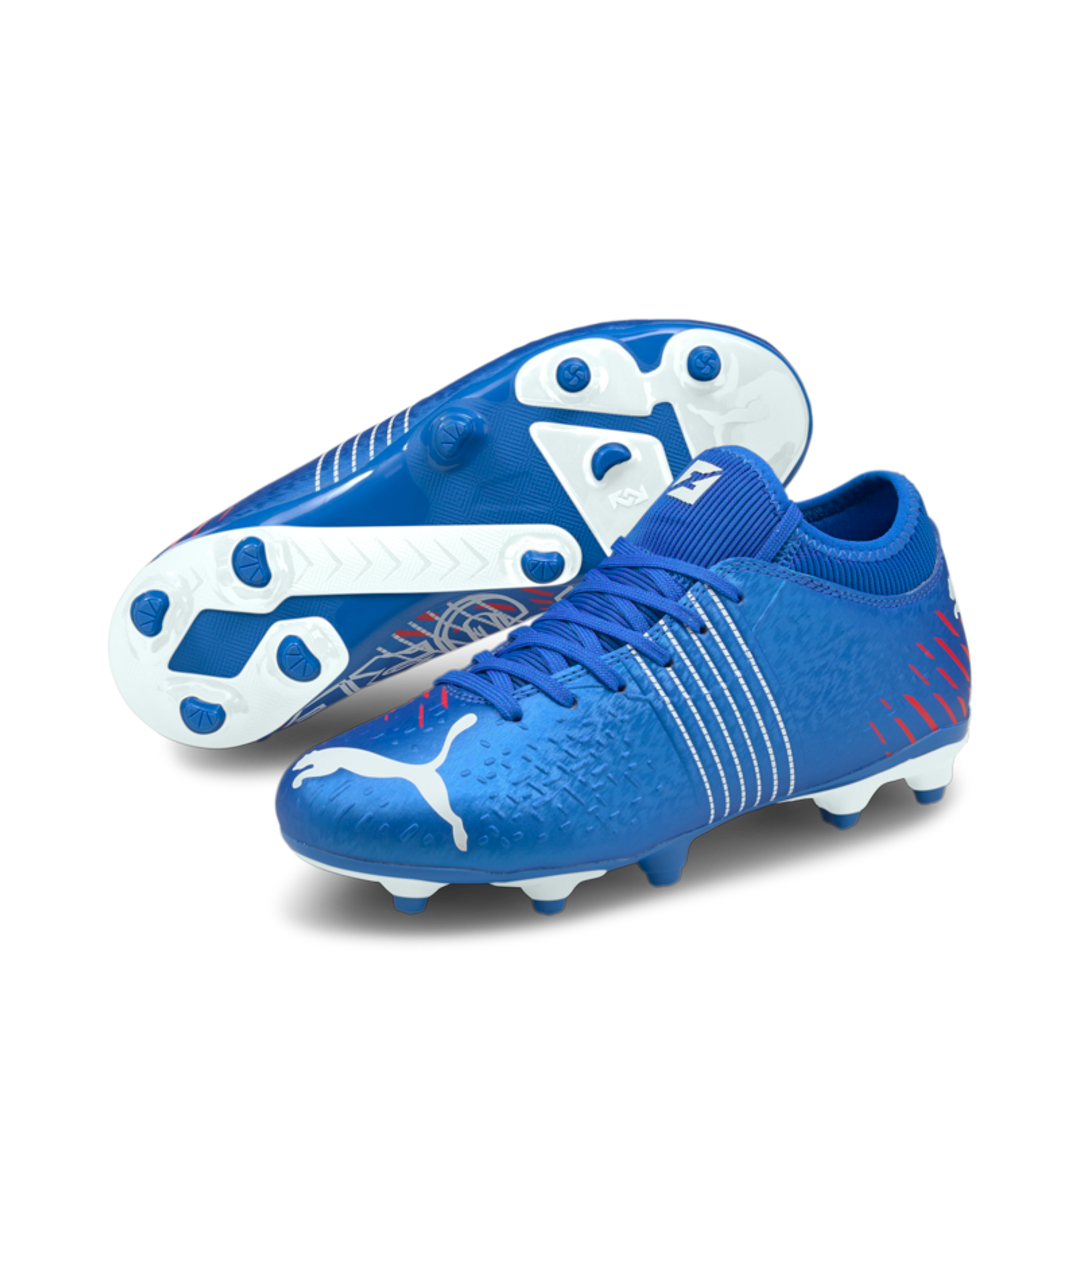 Puma Future Z 4 2 Firm Ground Soccer Cleats Youth Version 01 Blue White Chicago Soccer